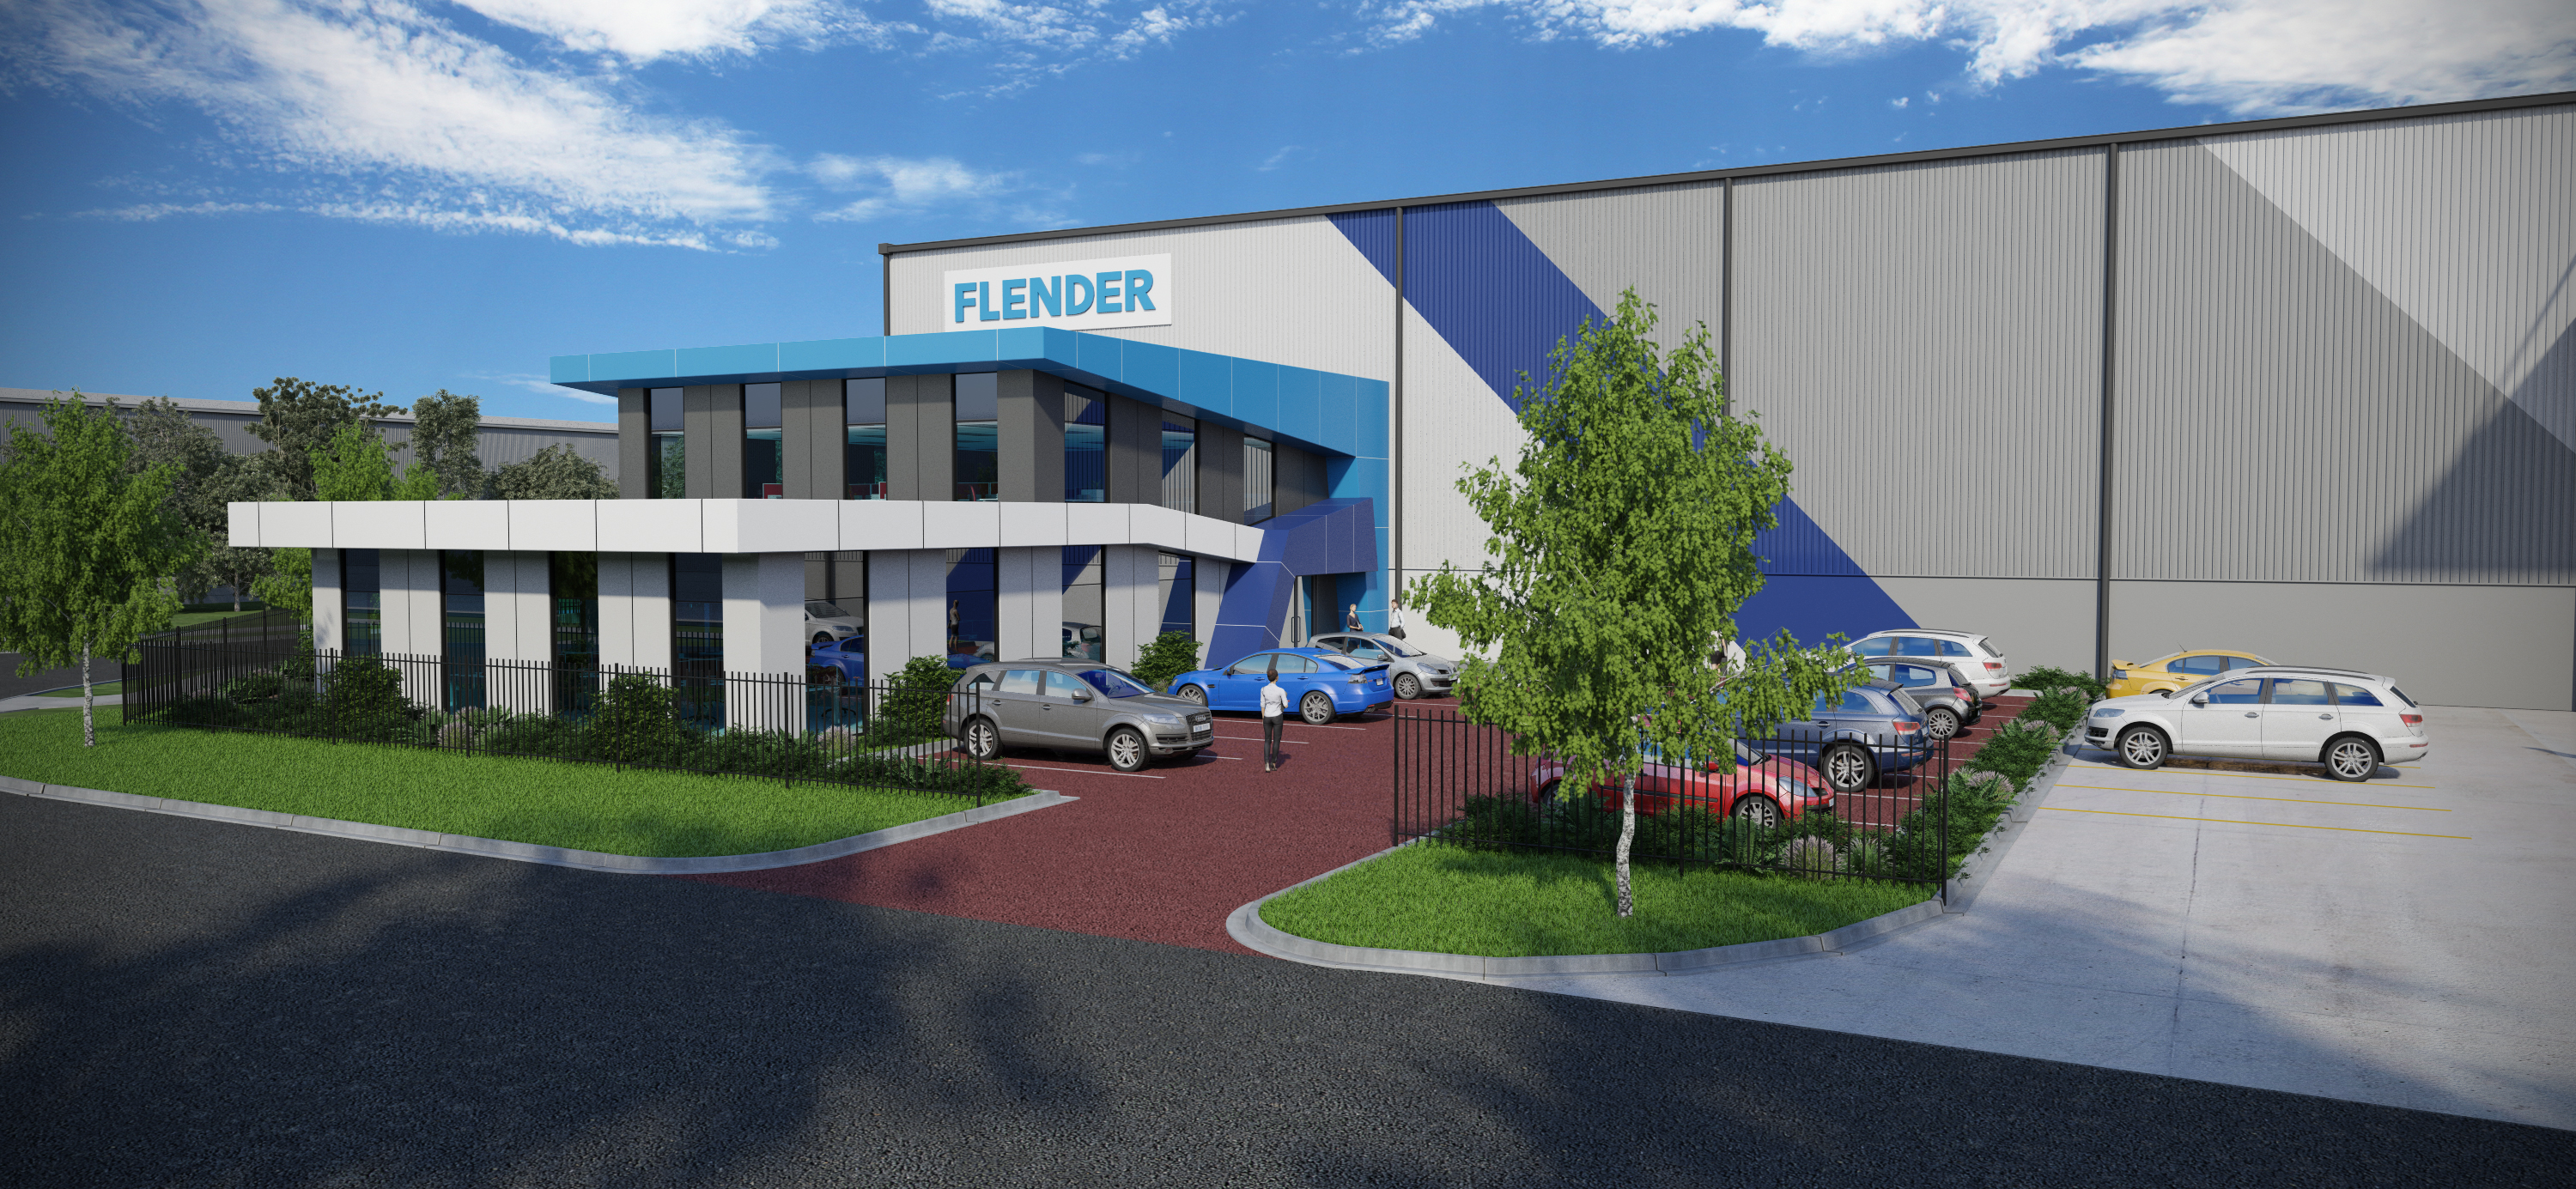 Flender's new state-of-the-art facility in Bayswater will be completed in September.